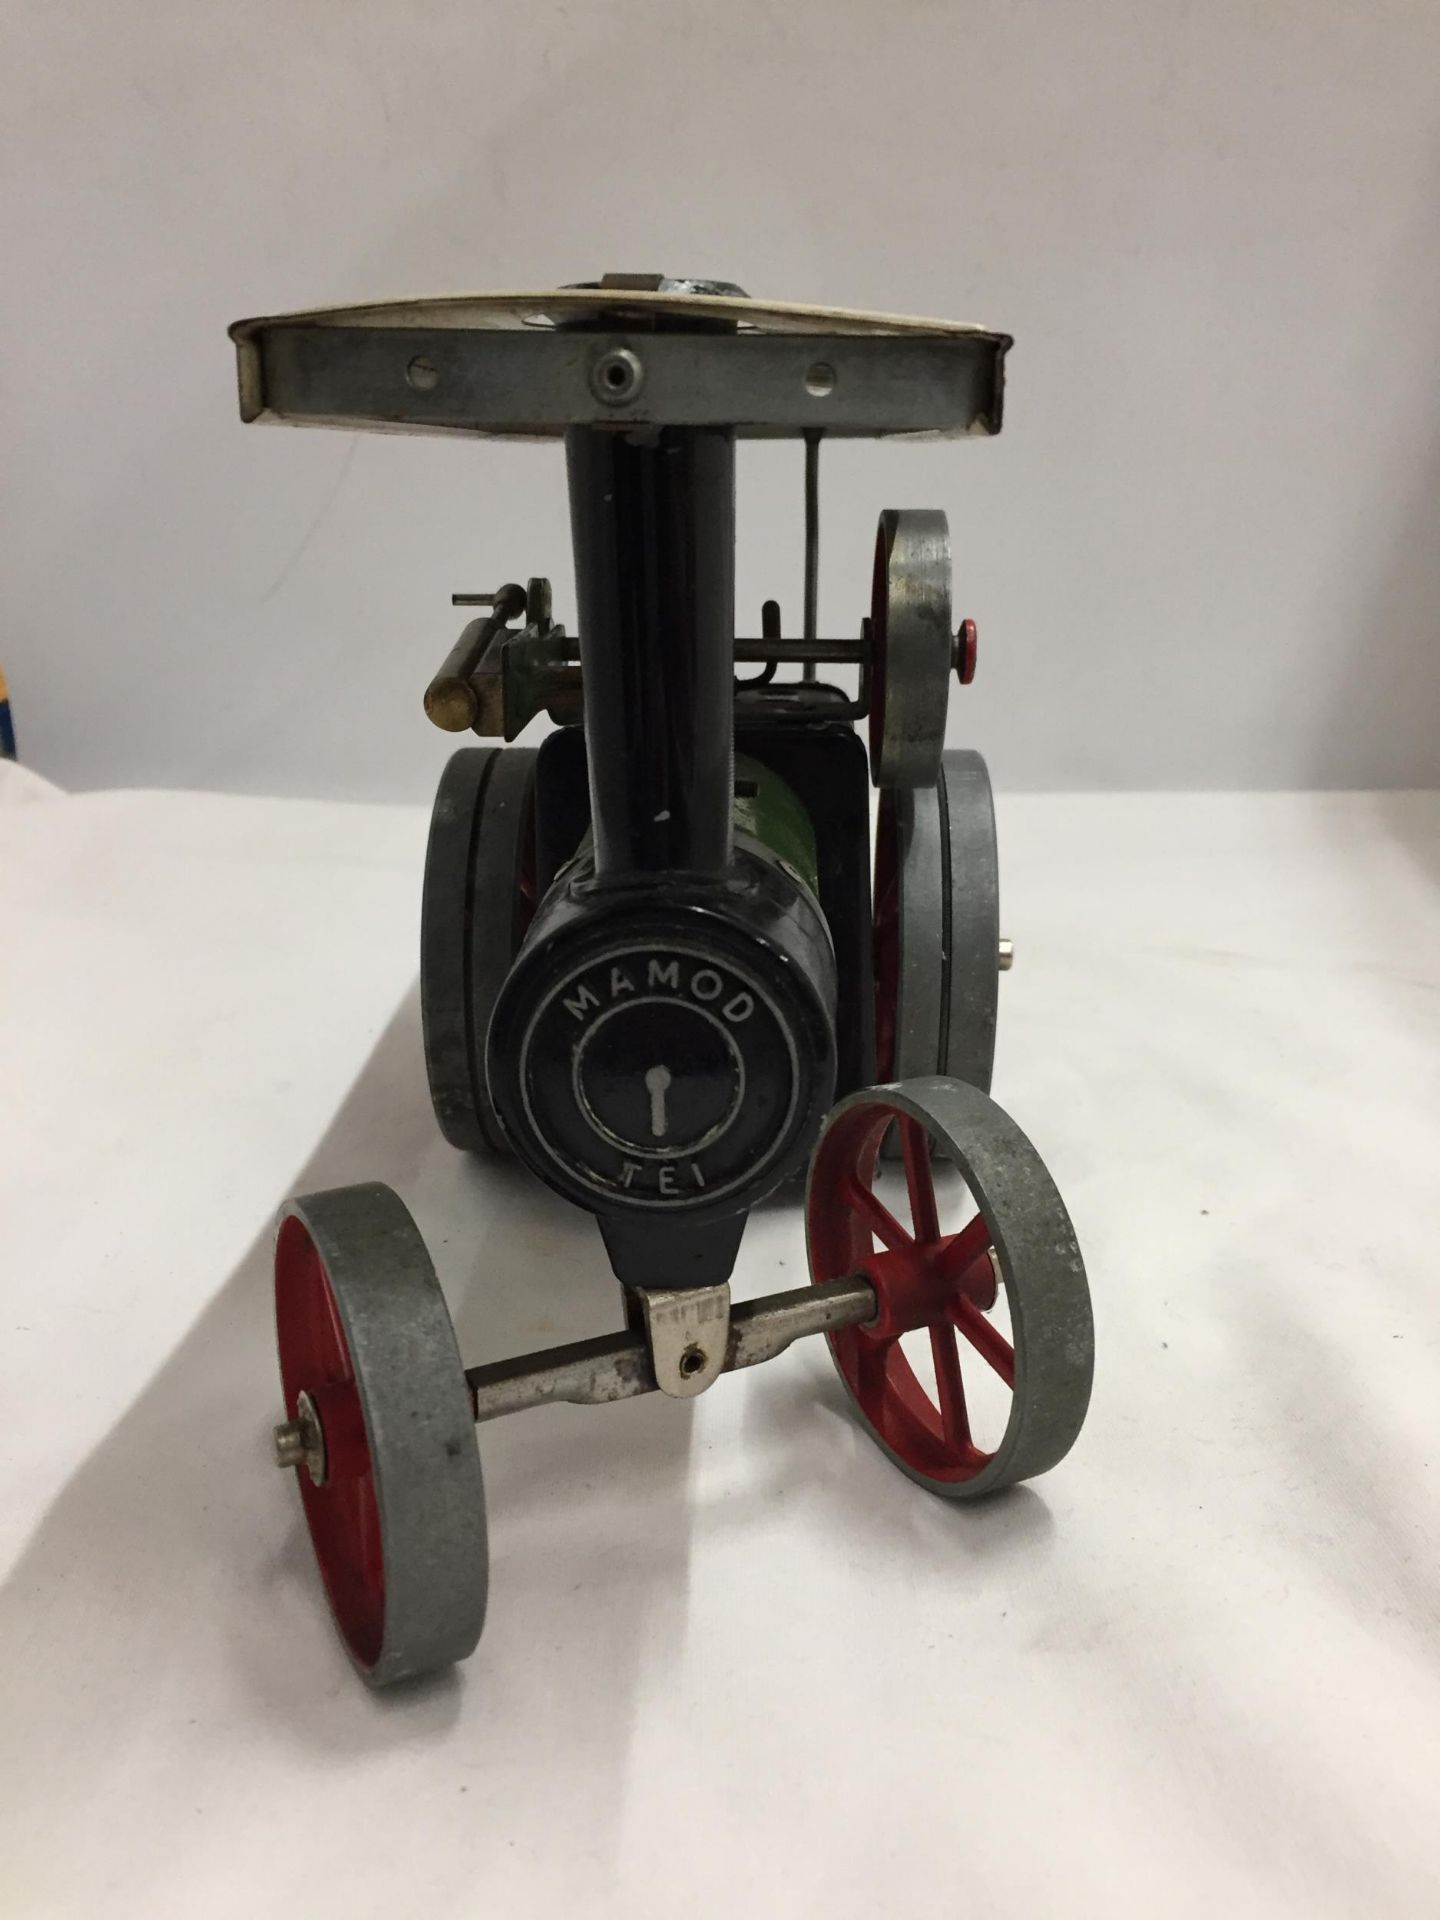 A VINTAGE MAMOD TE1 MODEL STEAM TRACTOR WITH BURNER - Image 2 of 4